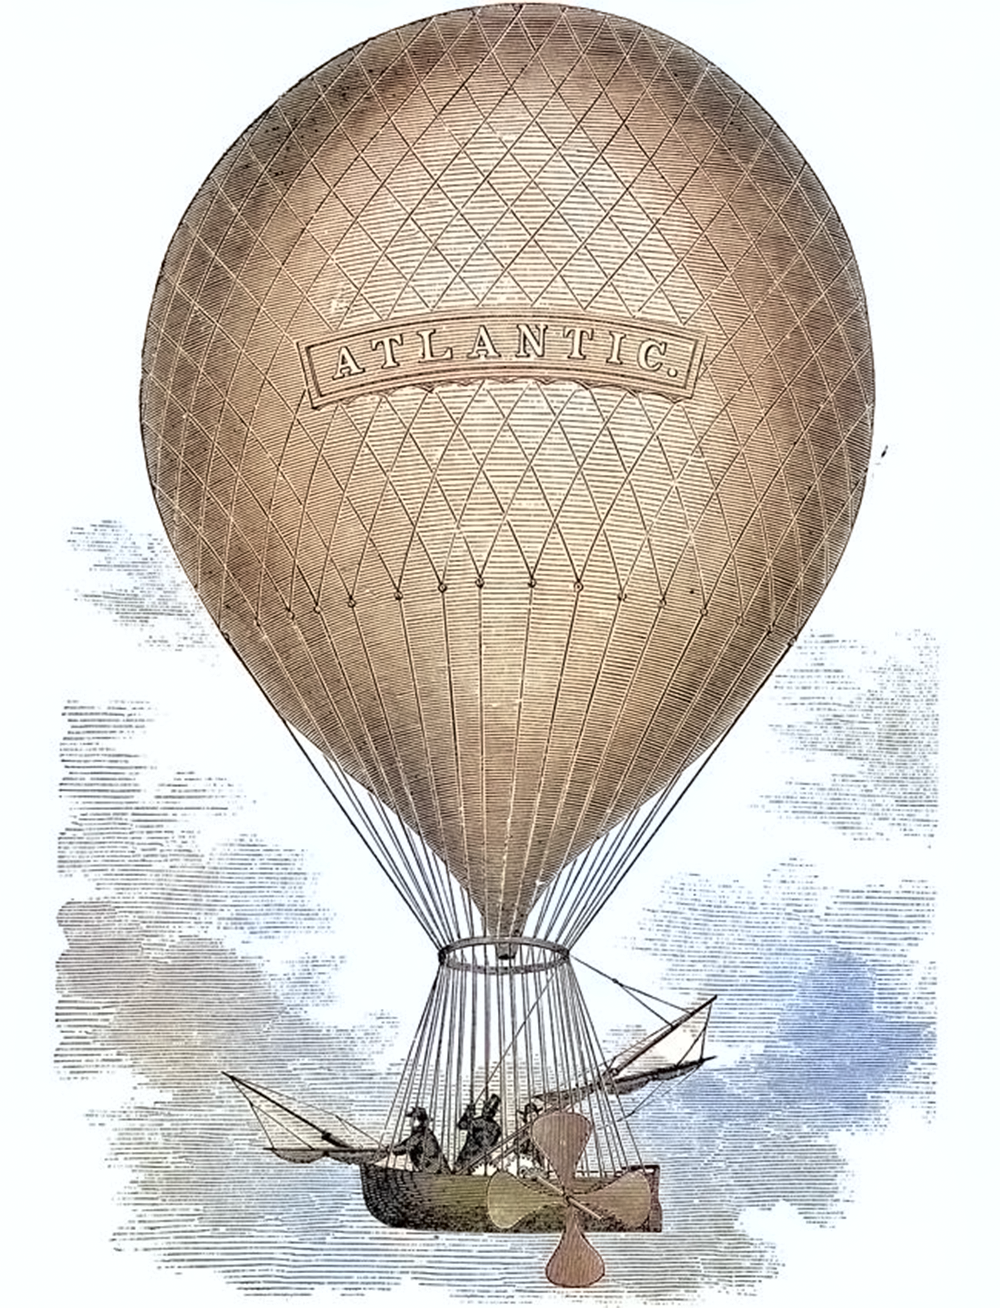 An illustration that shows a hot air balloon with a gondola suspended beneath it. The gondola has a propeller attached to it. The balloon is made of a light brown material. The gondola has two people inside. The balloon is flying high in the sky and there are clouds in the background.